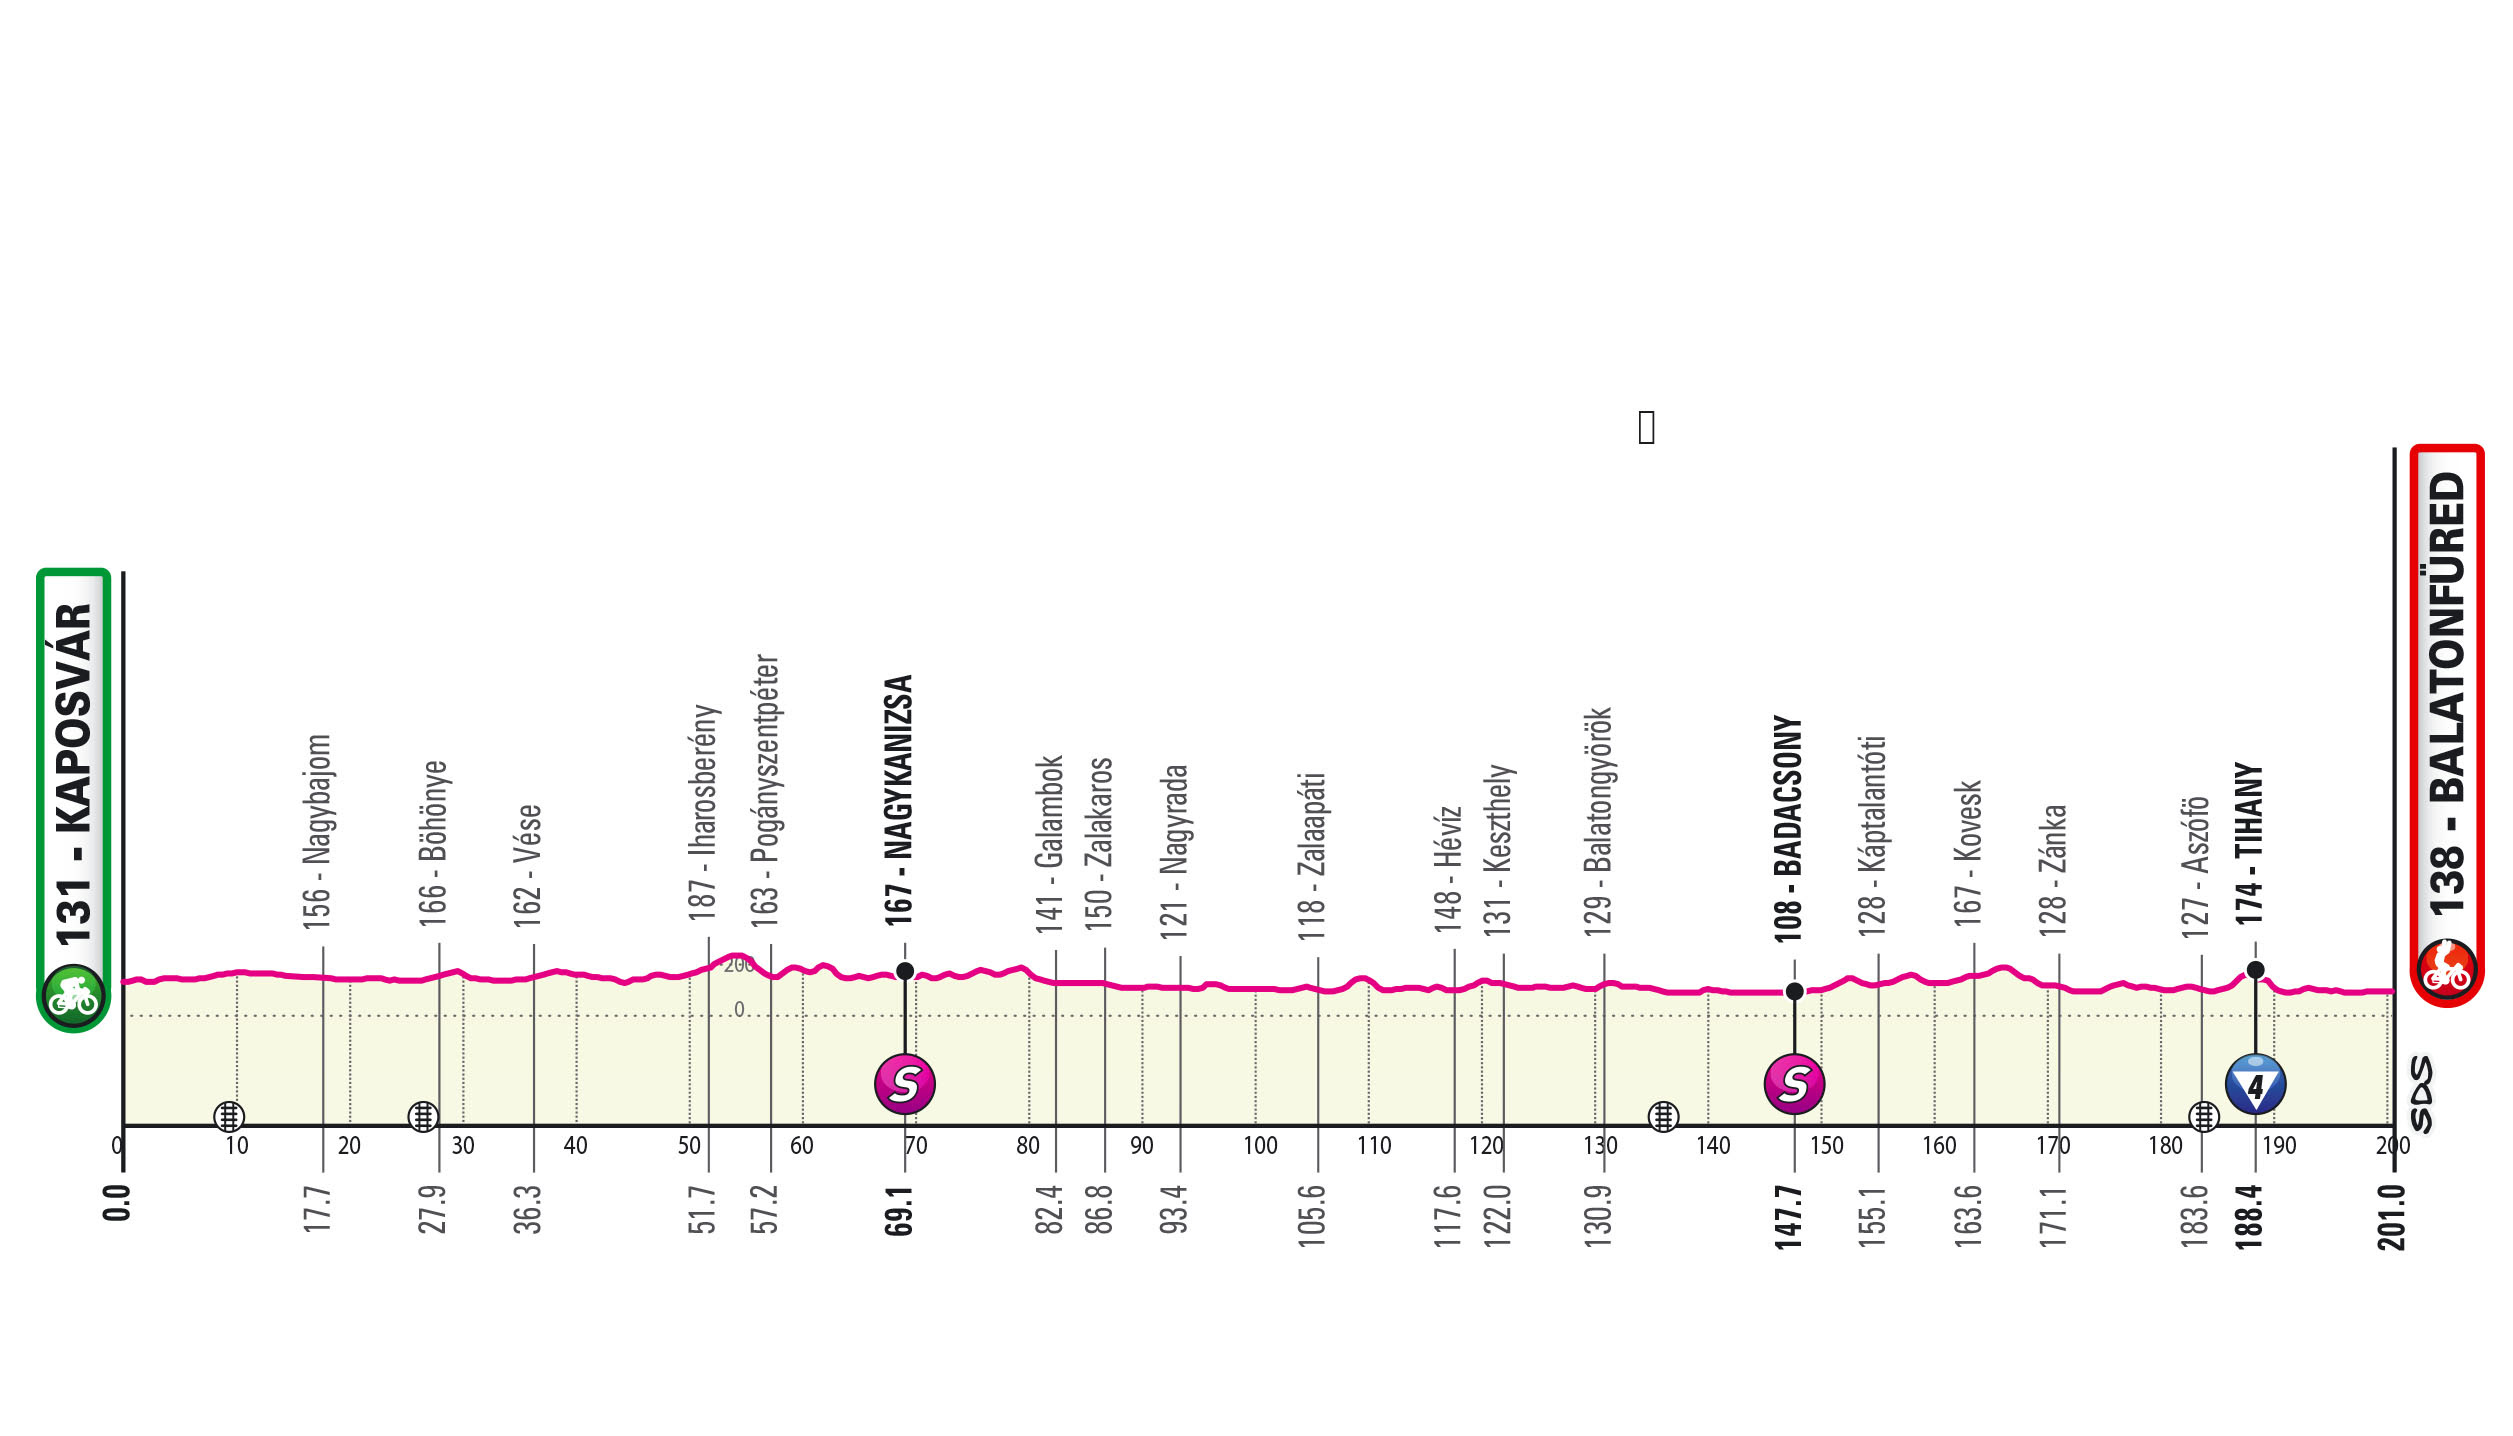 Giro d'Italia 2022 route: Every stage detailed for 105th edition